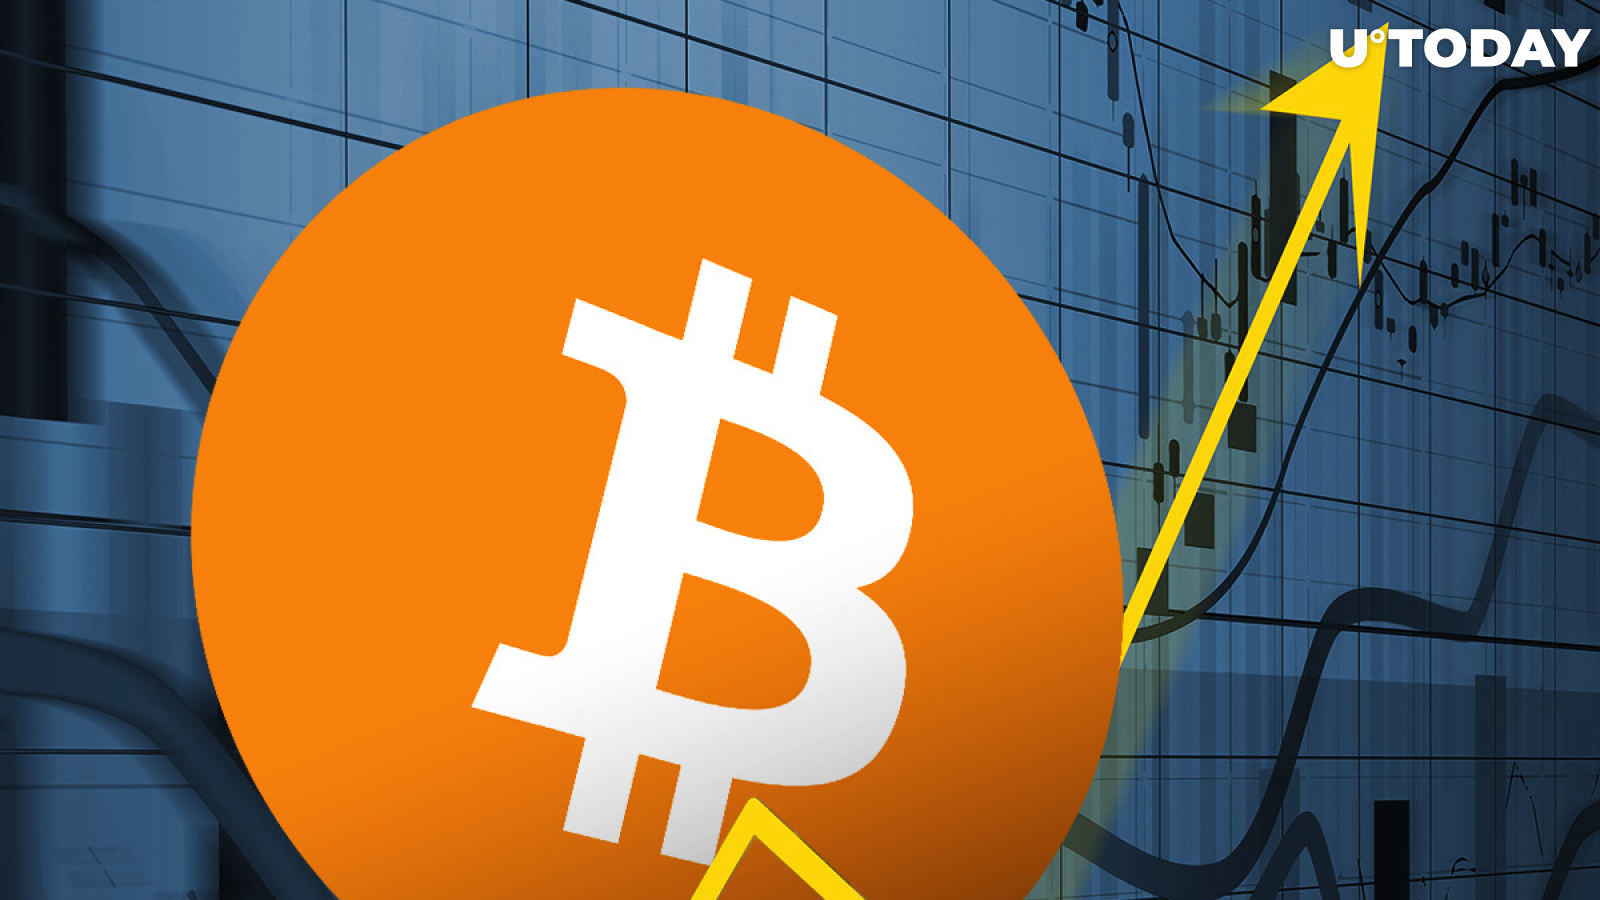 Bloomberg's Analyst: 'We Expect Bitcoin Price to Continue Appreciating'